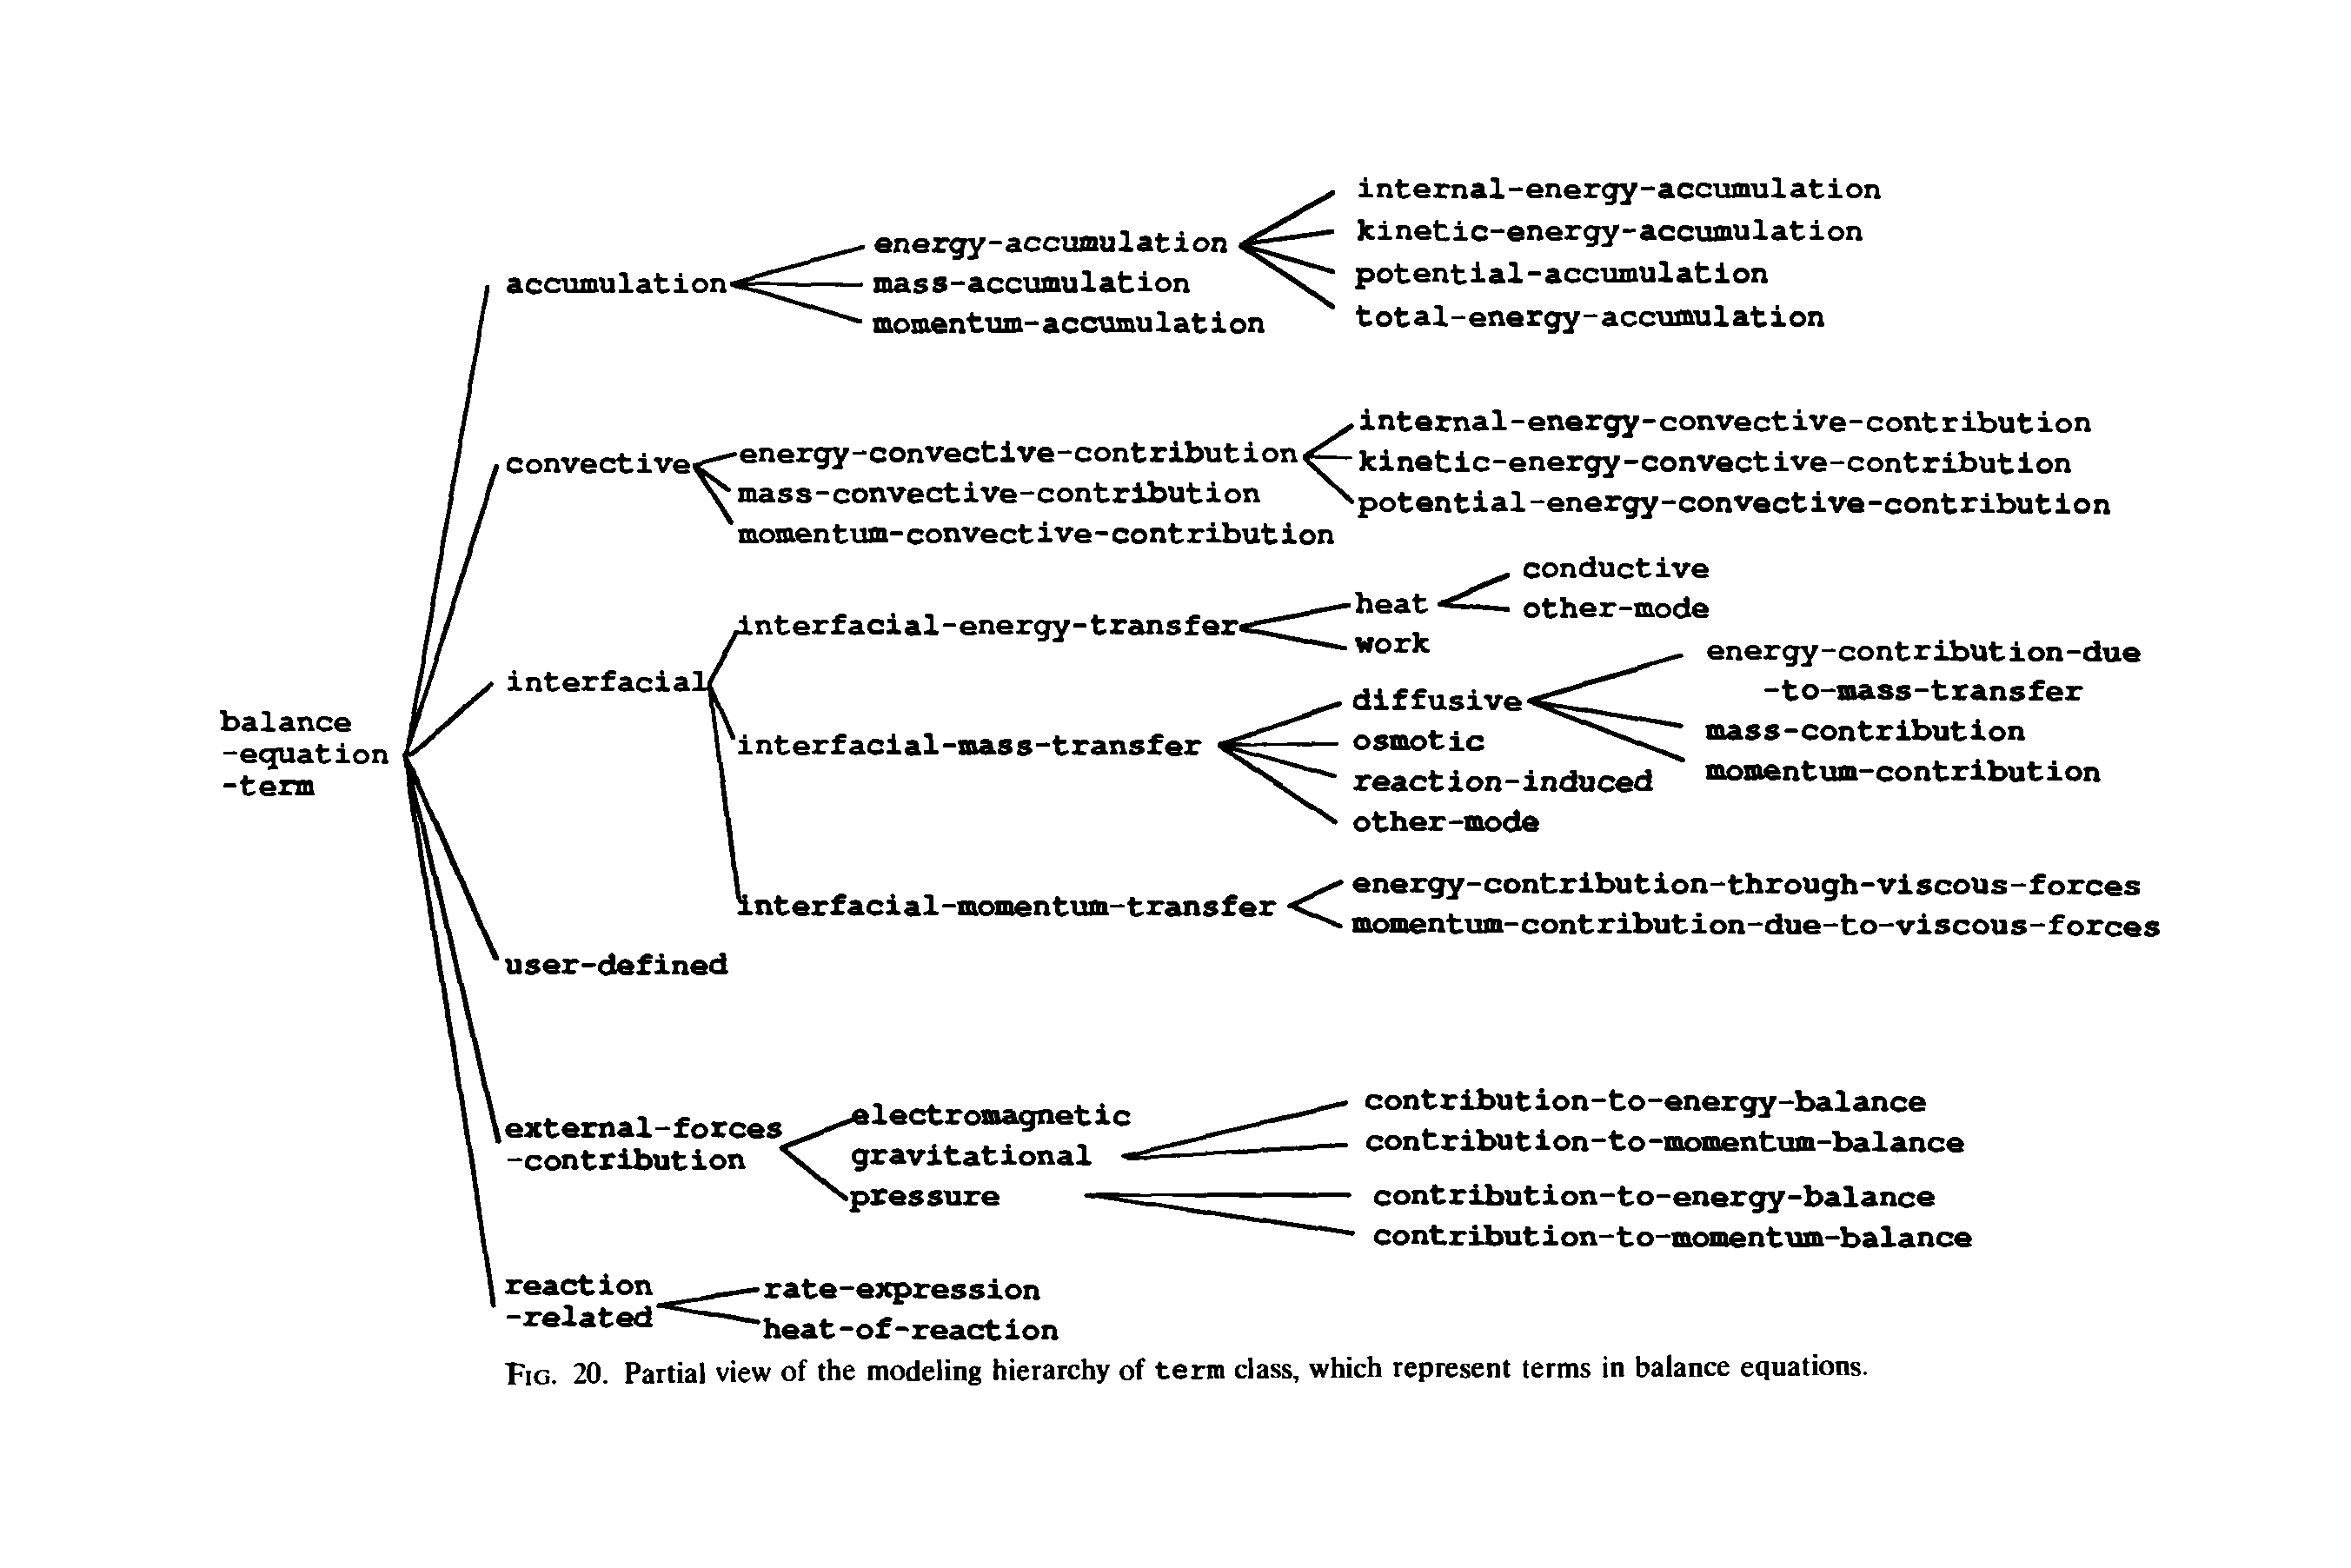 Fig. 20. Partial view of the modeling hierarchy of term class, which represent terms in balance equations.